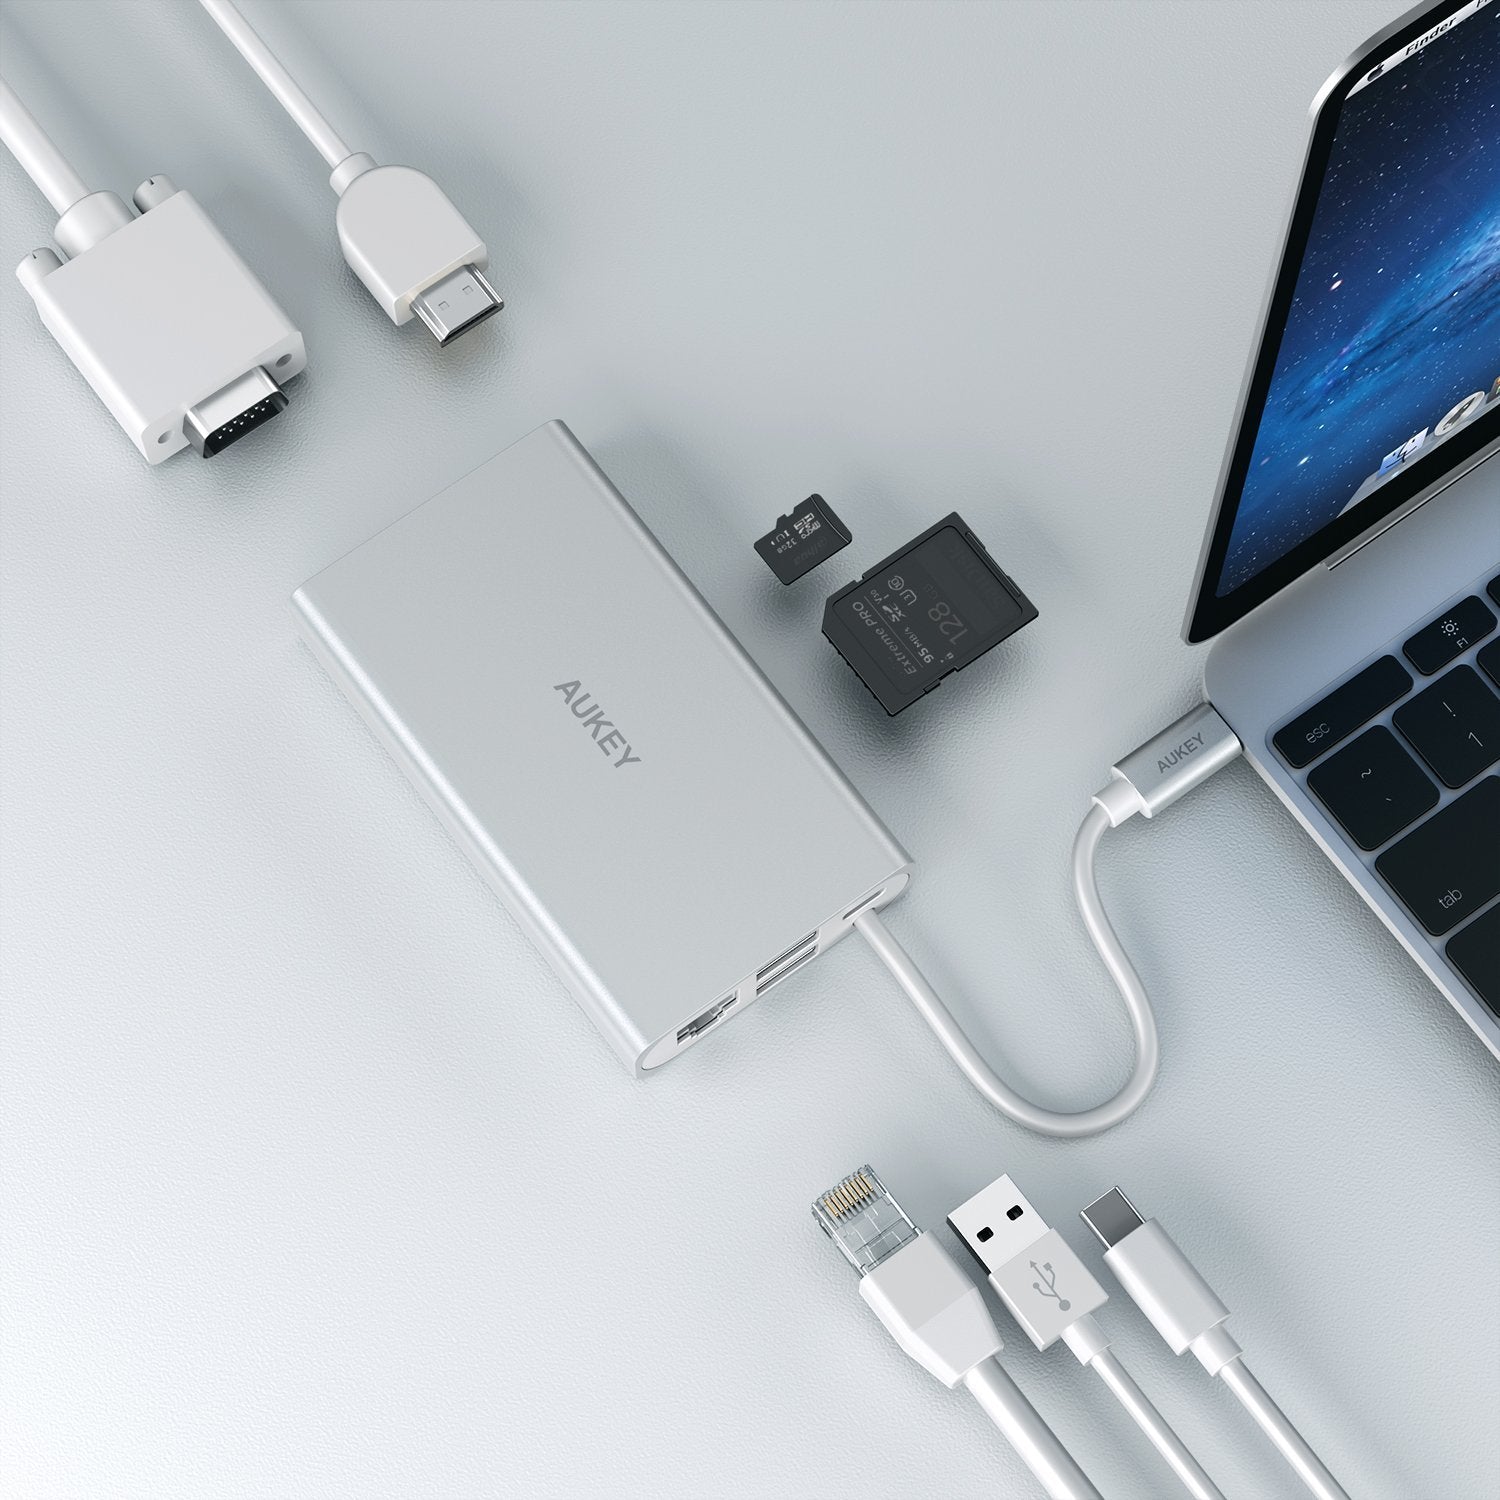 Usb c power delivery. Connecting USB-C 5 in 1.